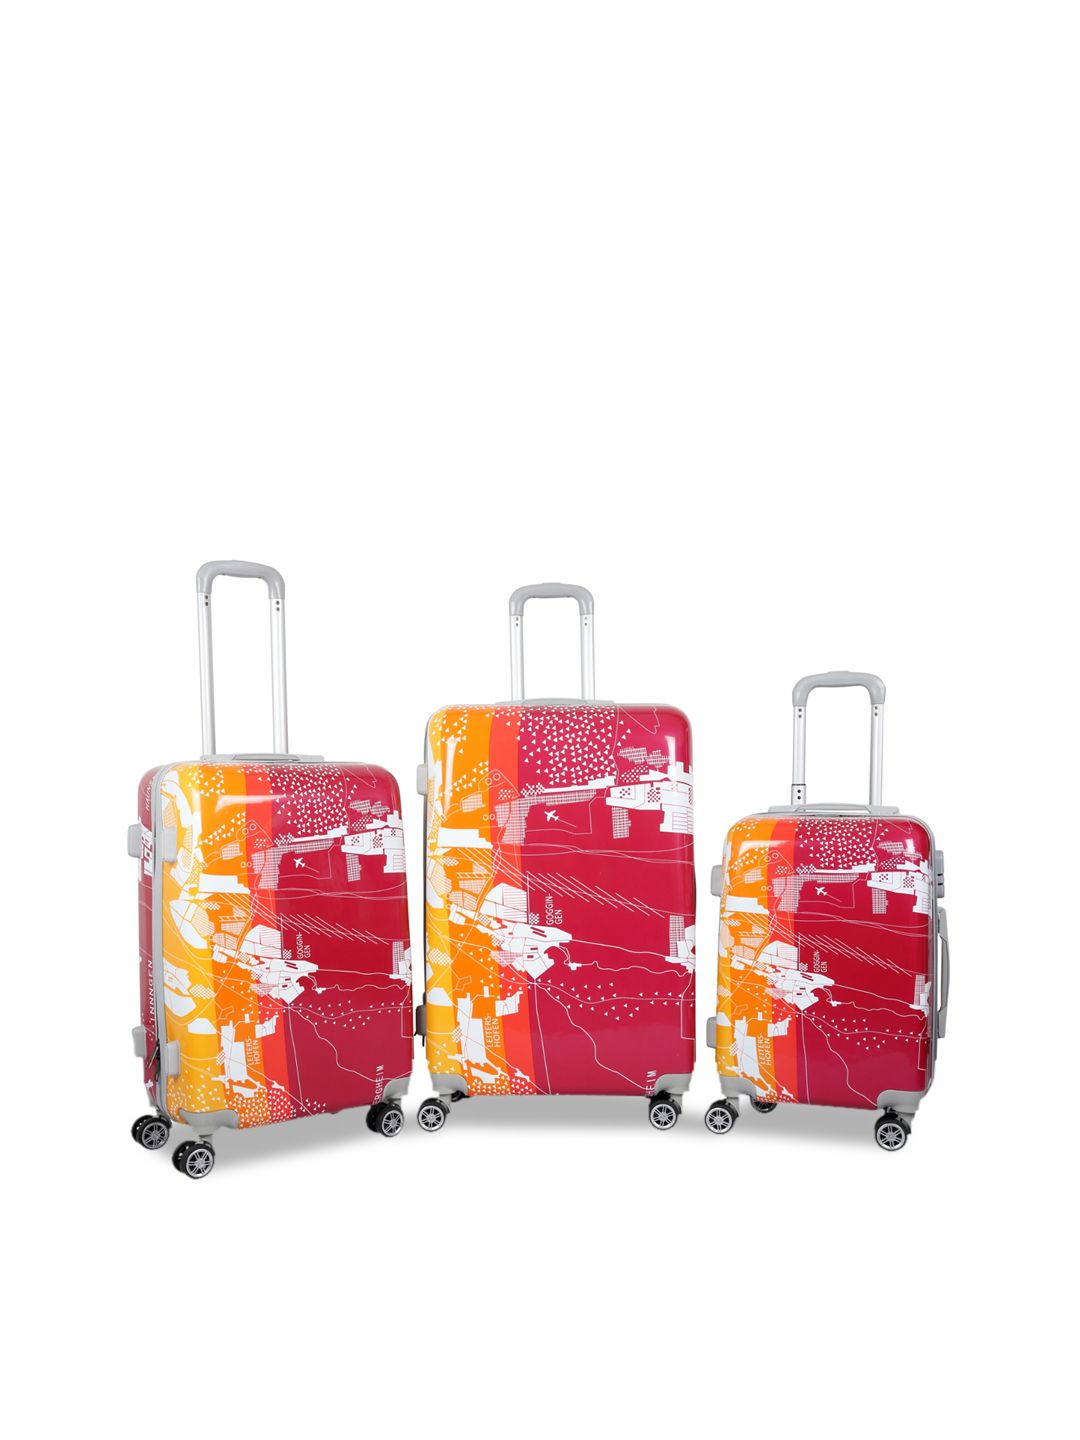 Polo Class Unisex 3 Pcs Red Hard Luggage Trolley Bags Price in India